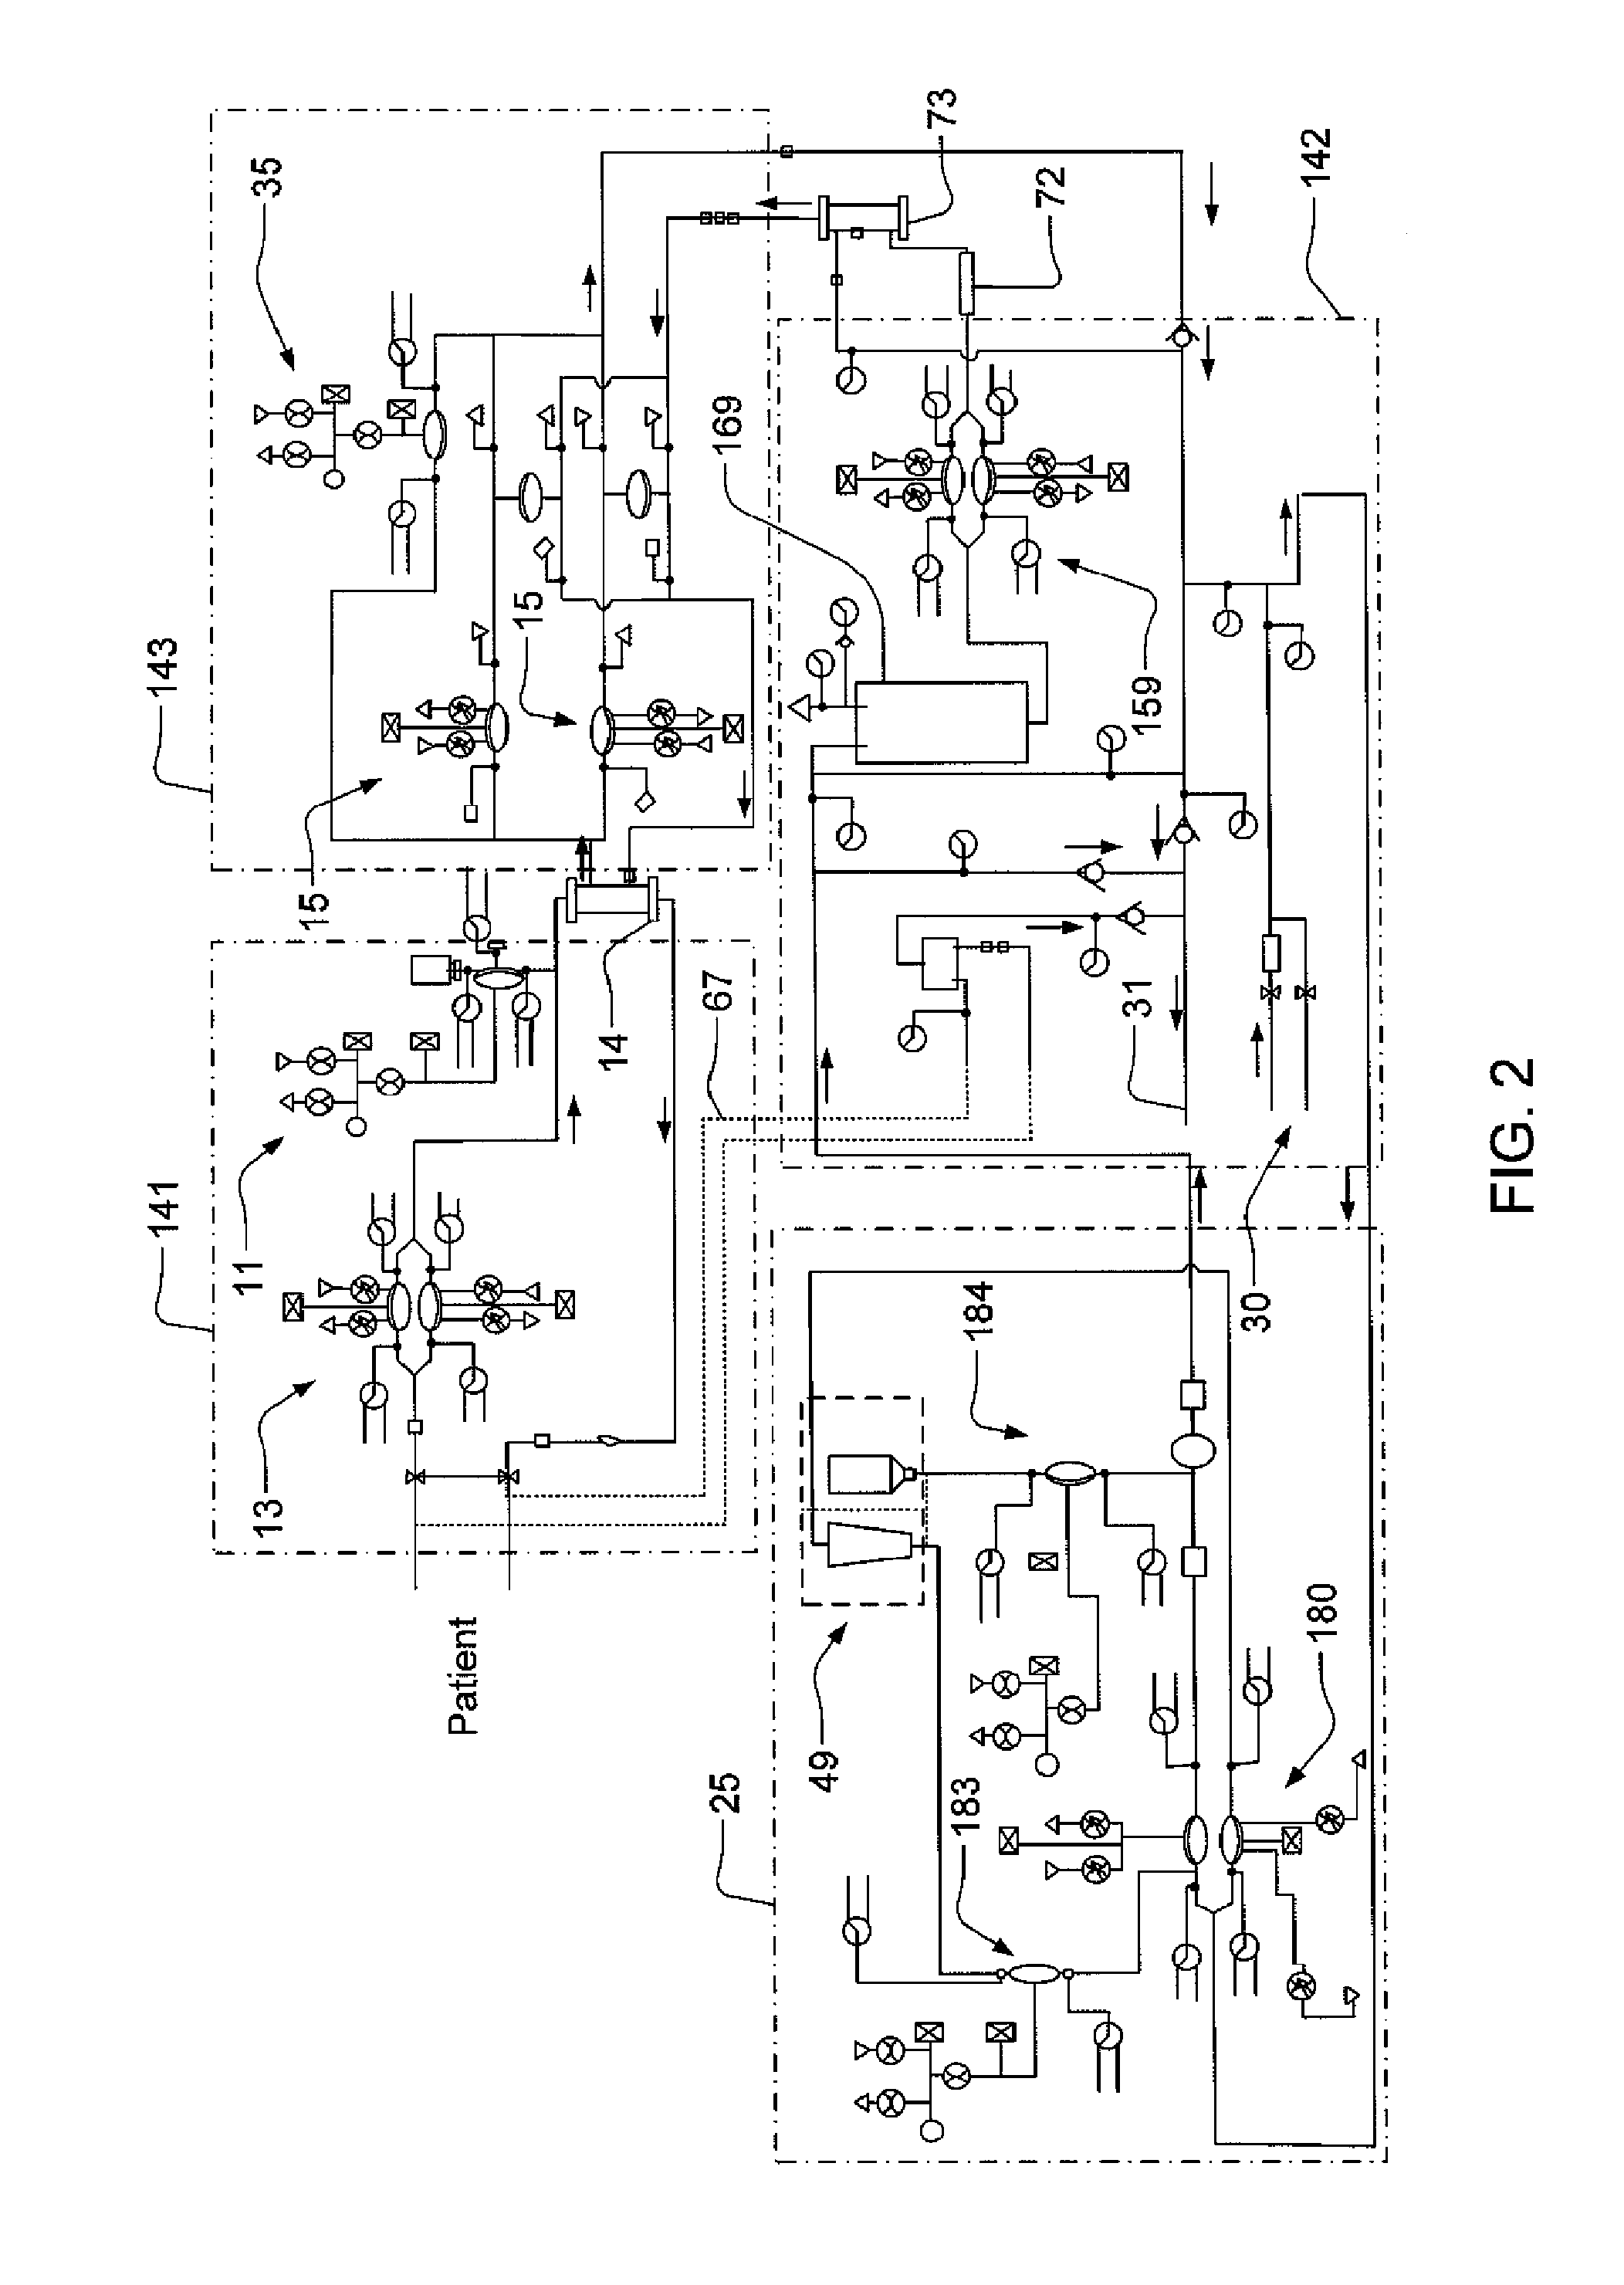 Reagent supply for a hemodialysis system